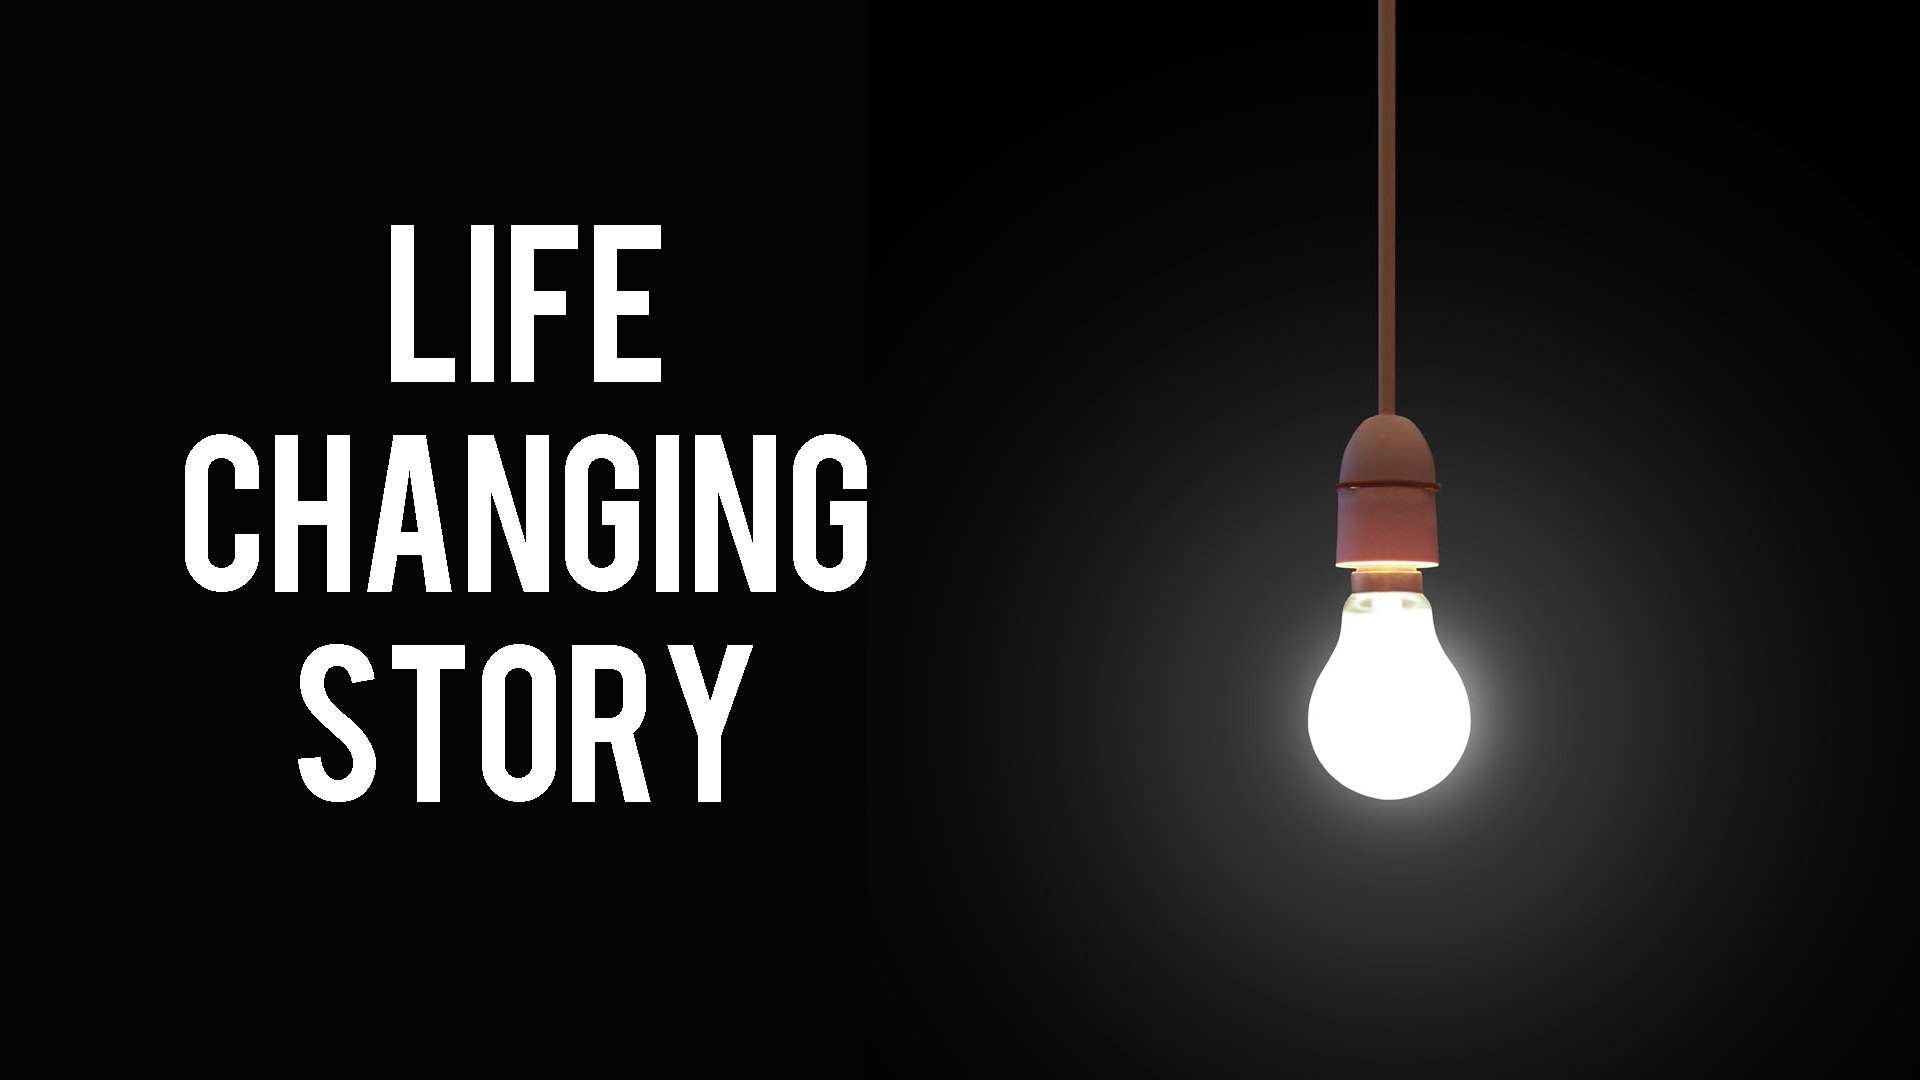 When the life is changing. Life changing. Life changes. Life changes фон. Life story.